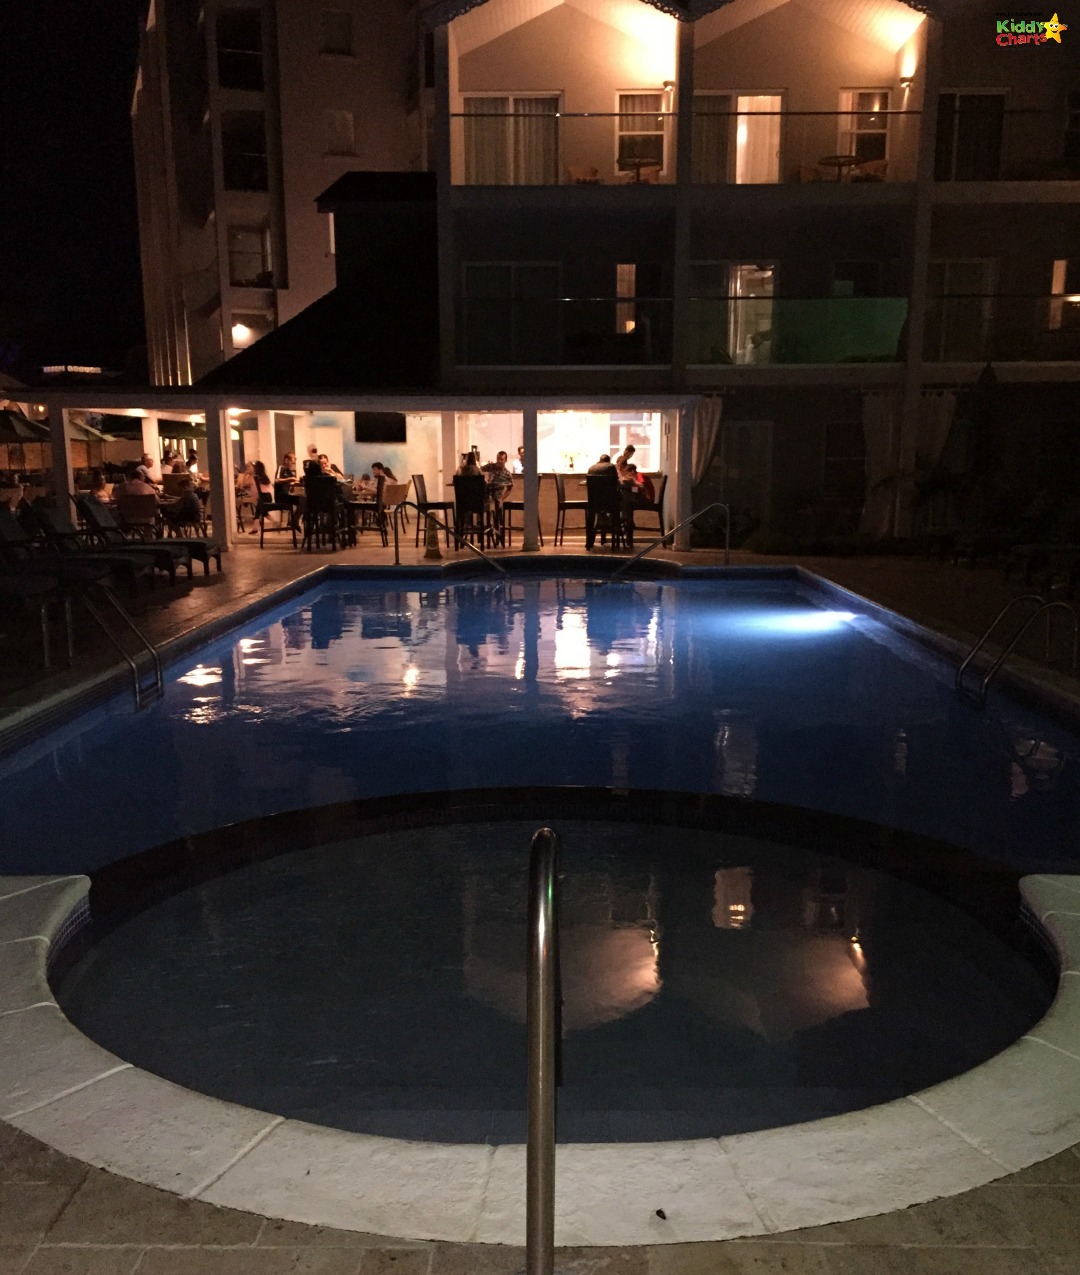 Sea Breeze Beach House Review - the Flying Fish at night - so relaxing, and look at that pool!